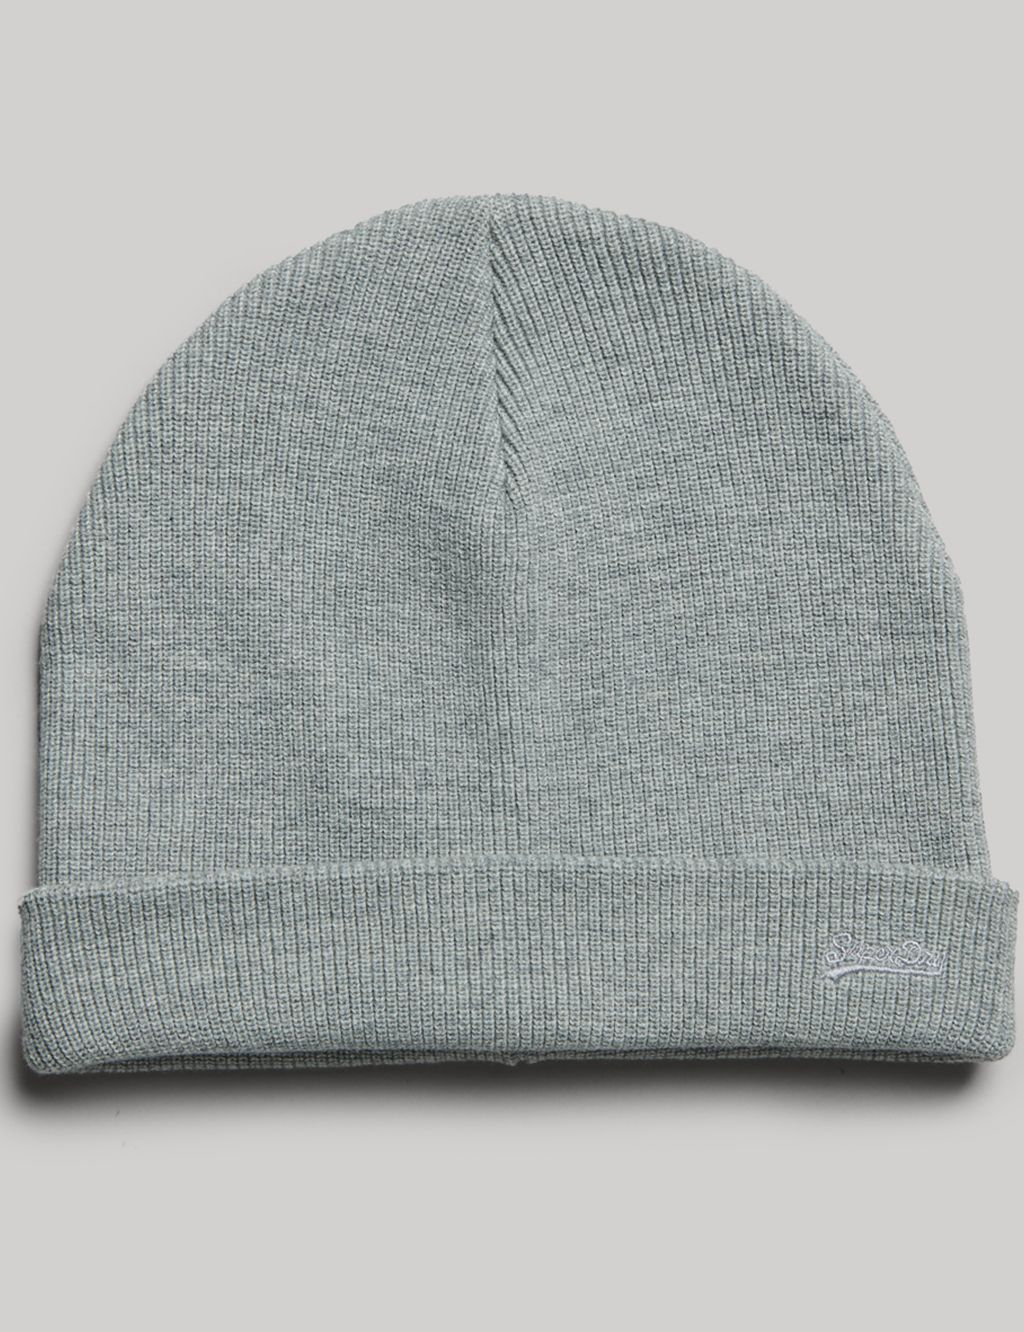 Pure Cotton Knitted Beanie Hat image 2